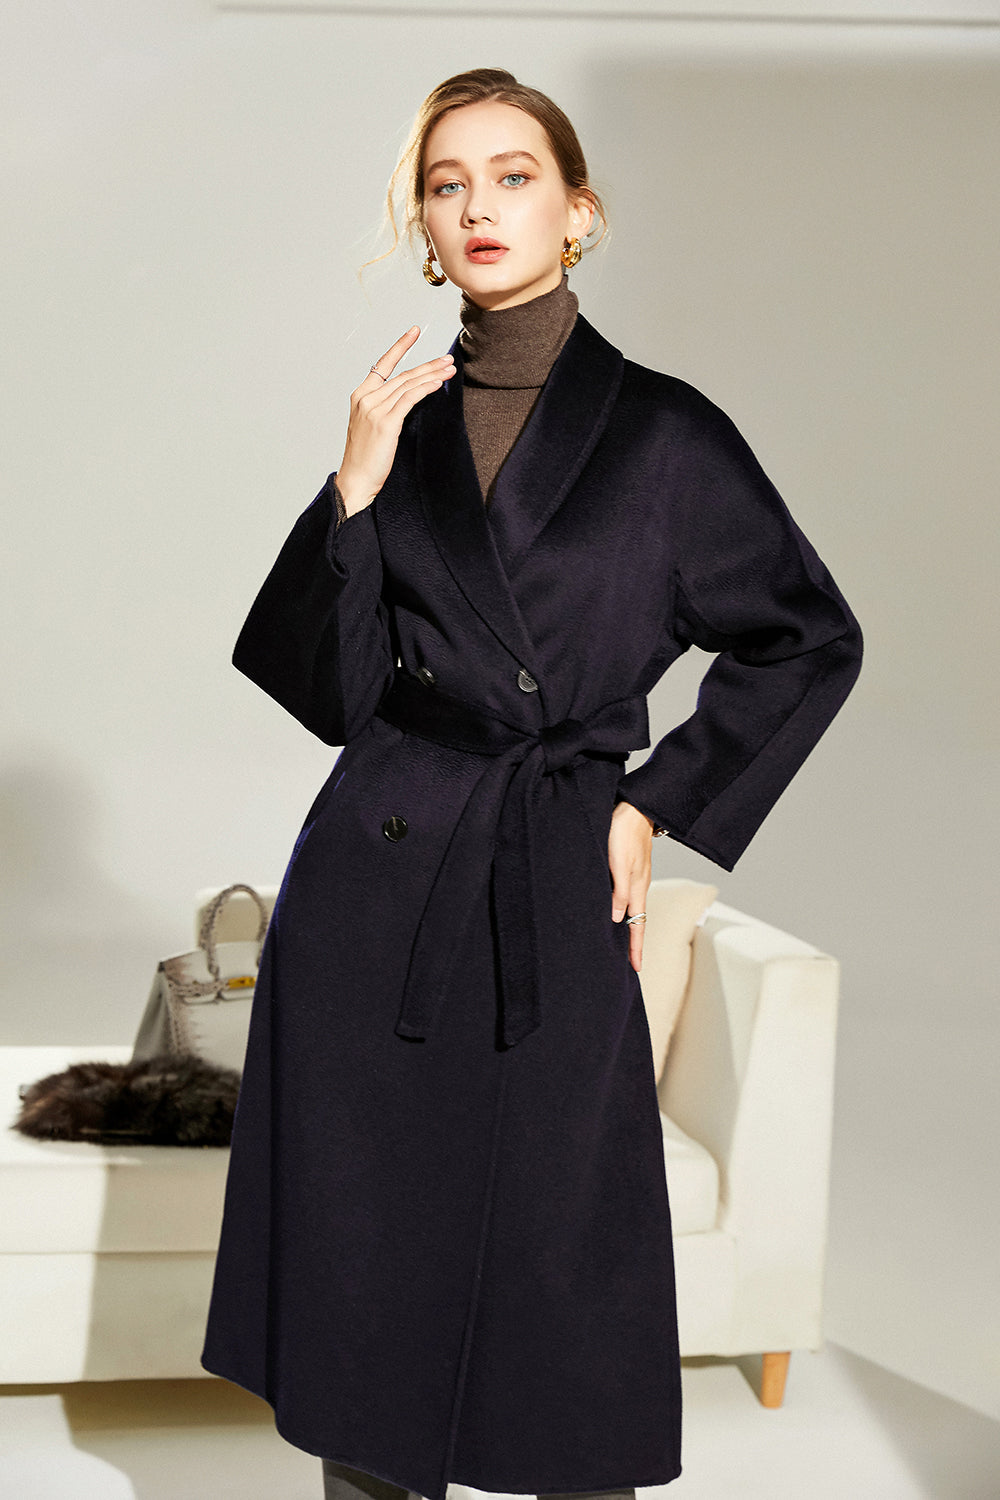 Black Wool Double Breasted Lapel Neck Long Coat with Belt